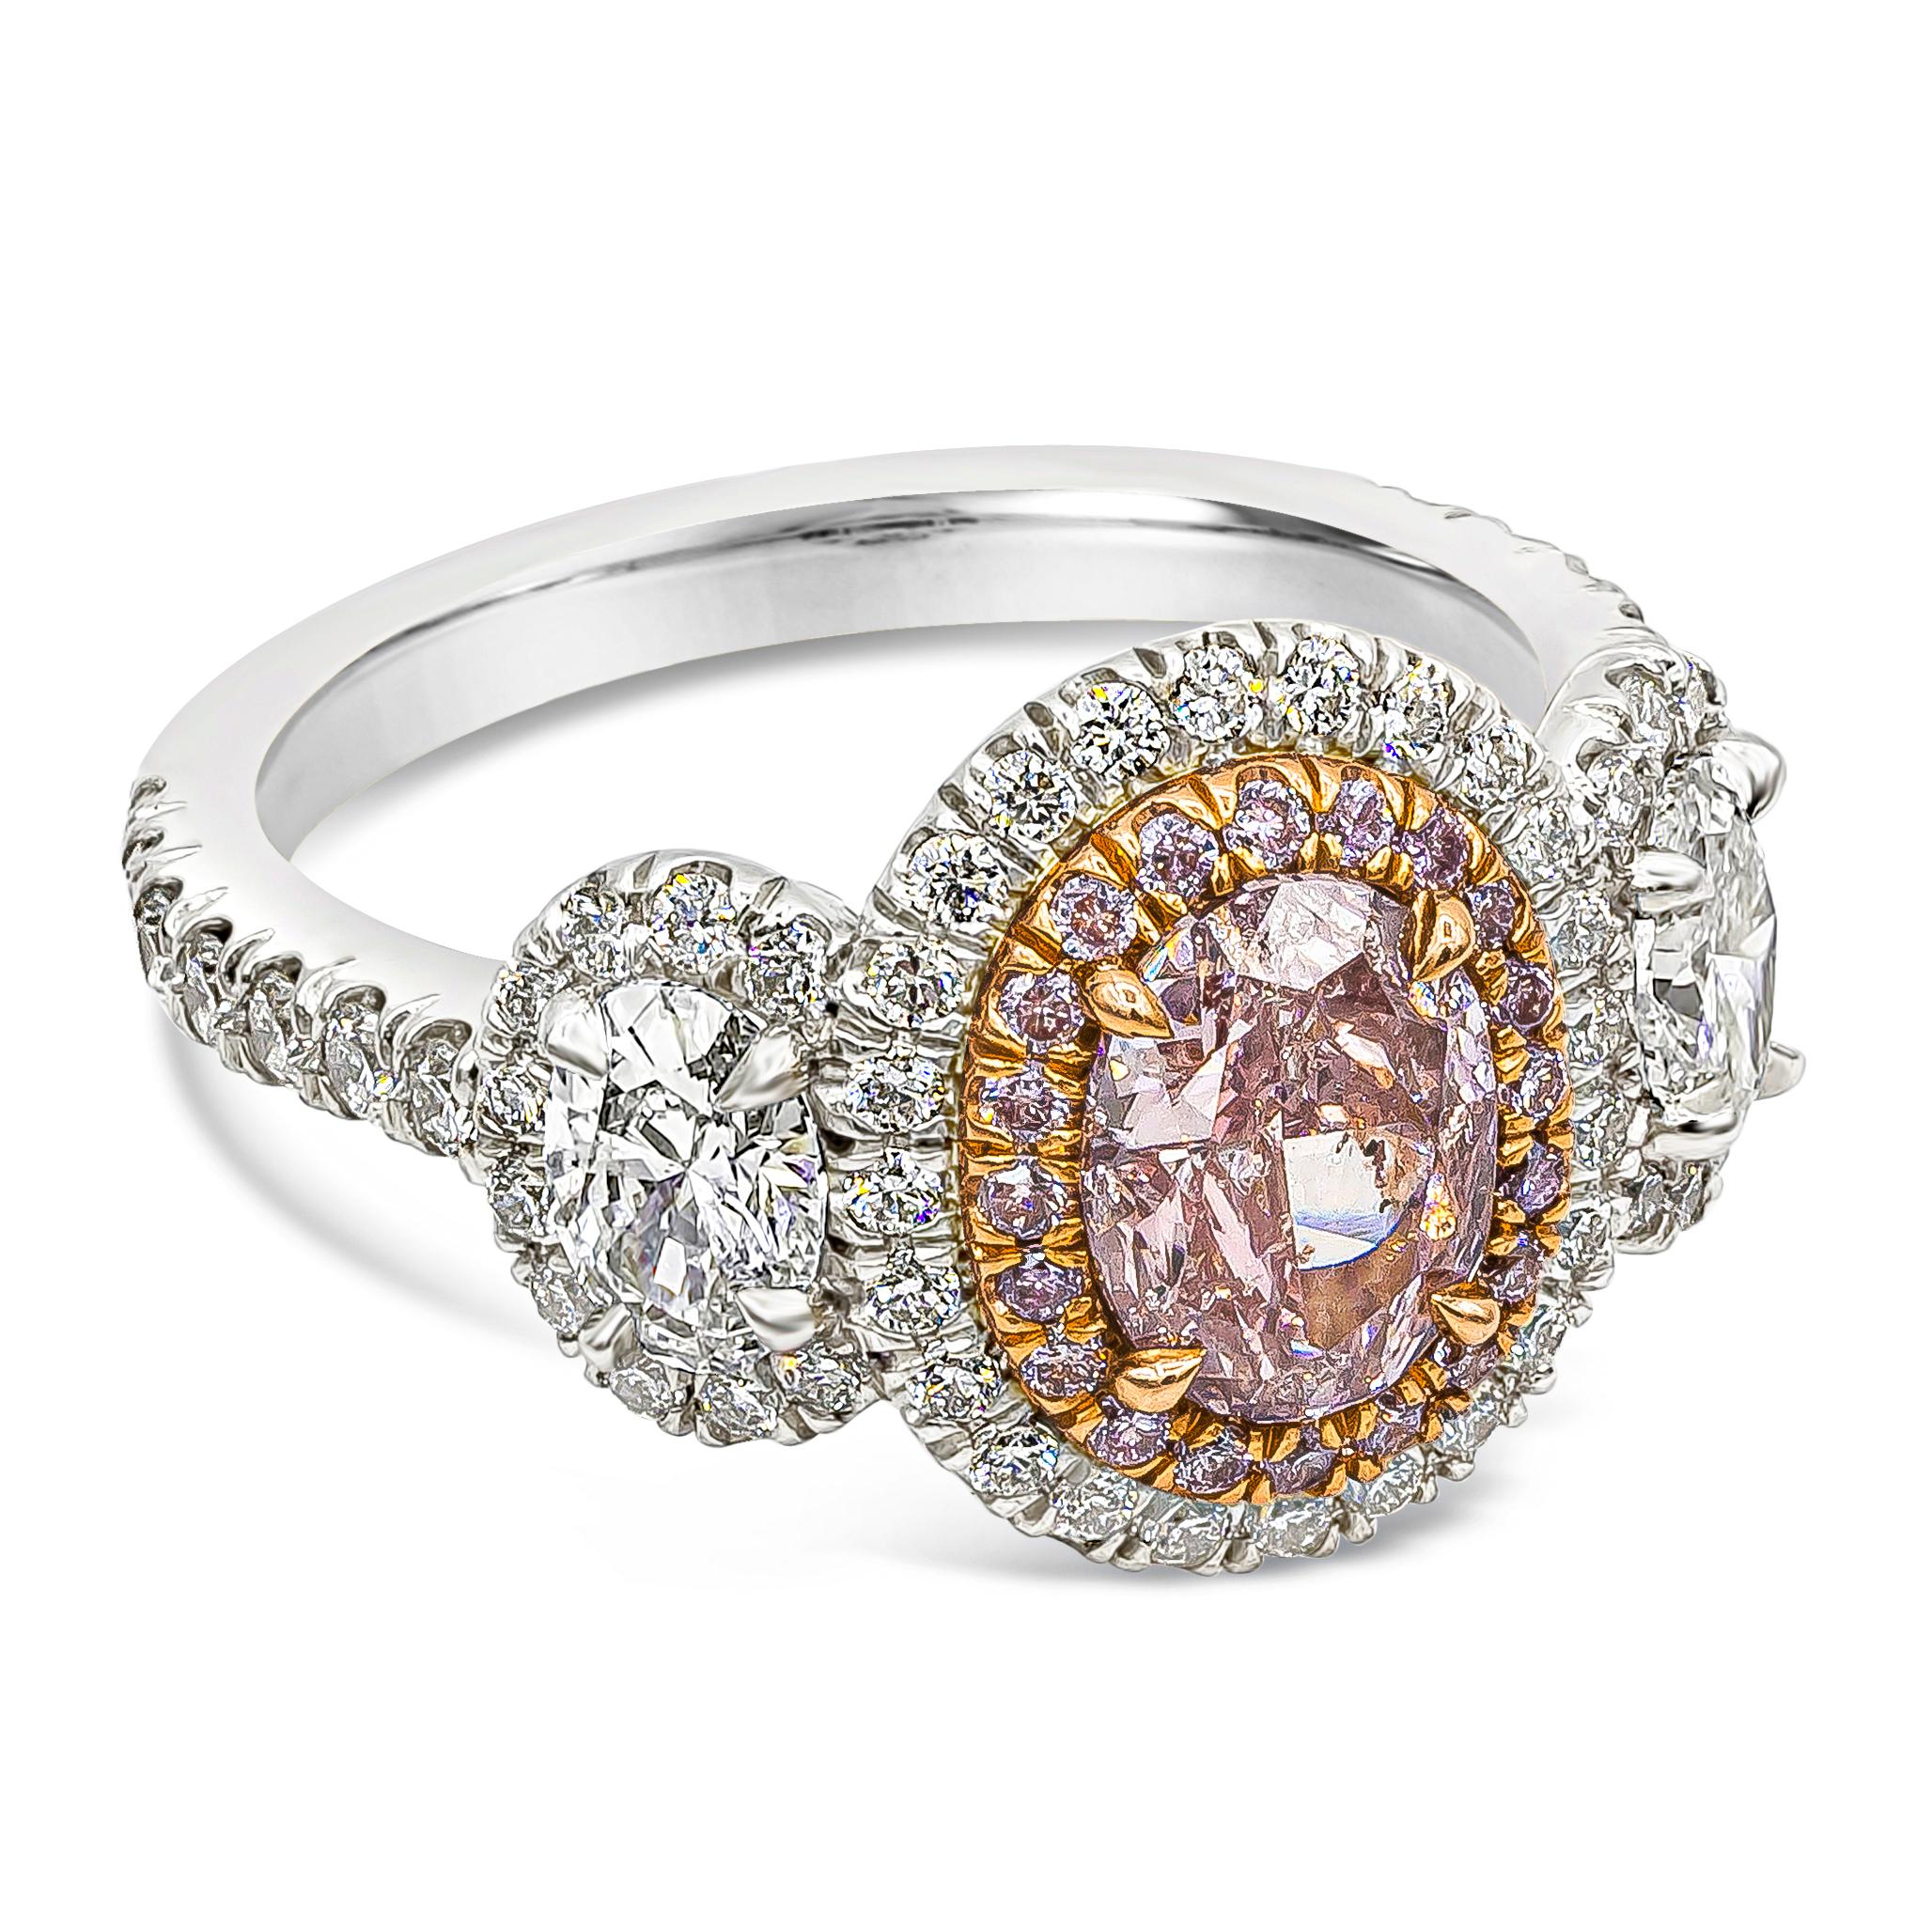 Well crafted engagement ring showcasing a 1.00 carat pink diamond certified by GIA as Fancy Intense Pink color, set in a double-halo mounting set with brilliant round 0.12 carat total pink and 0.58 carat total white diamonds. Flanked by two oval cut